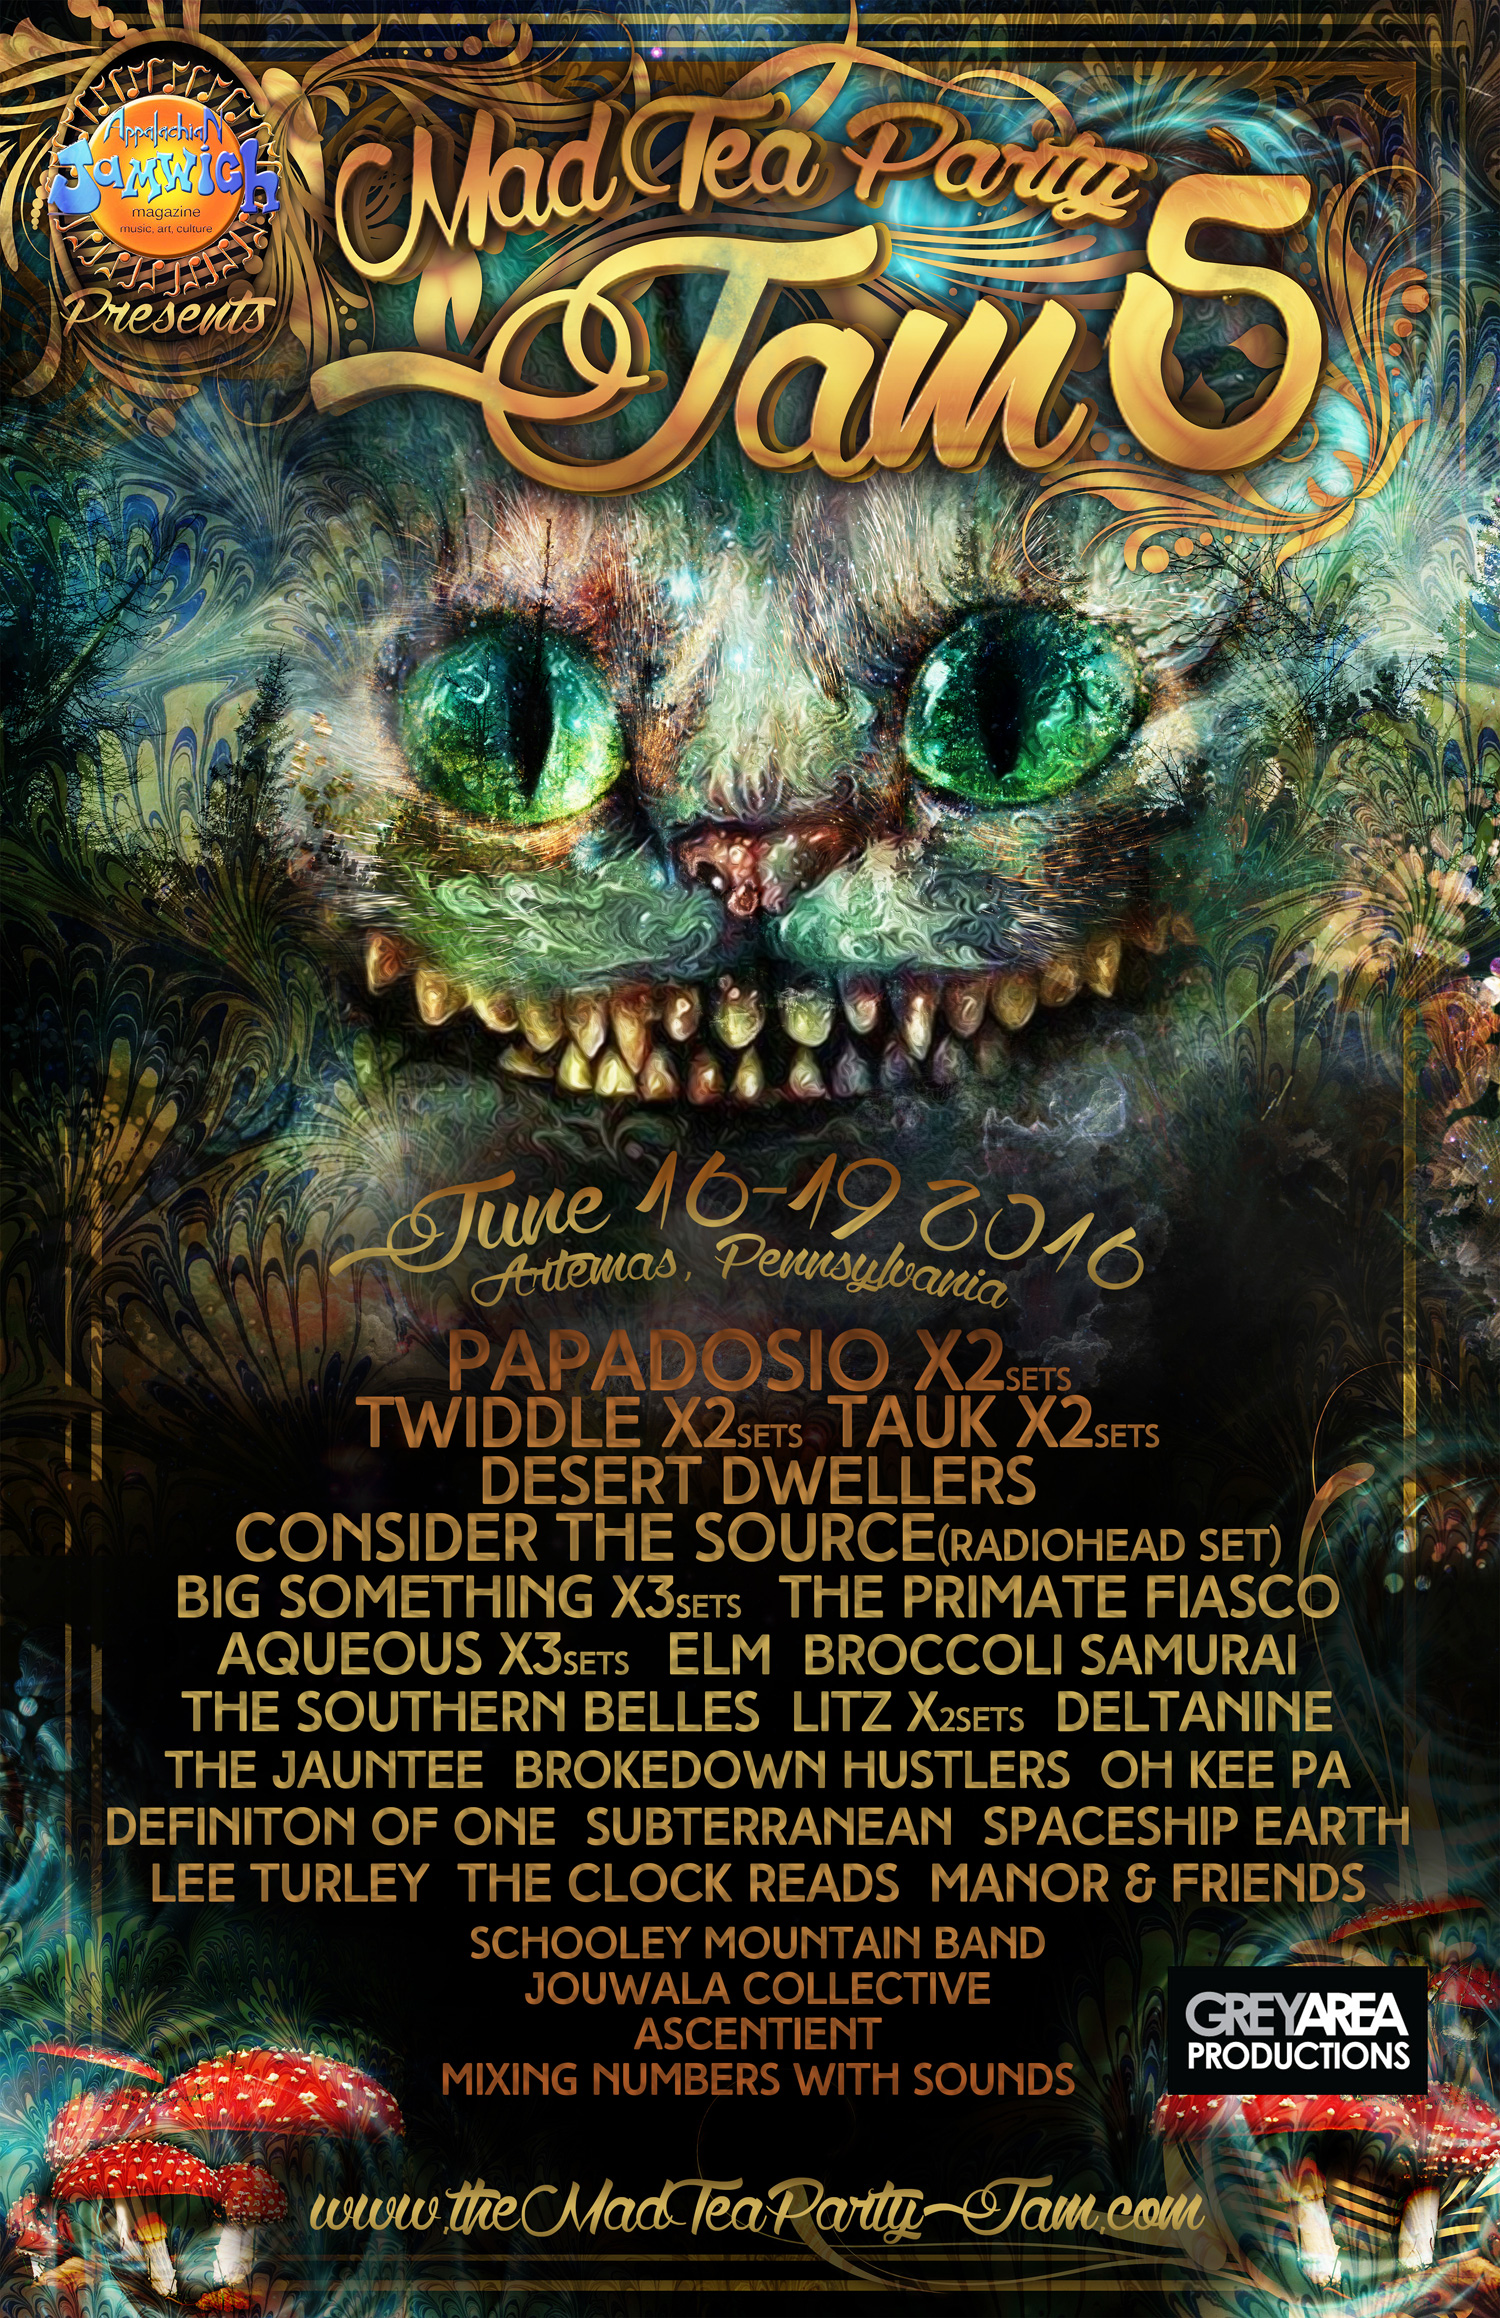 The Mad Tea Party Jam 5 Lineup Announcement New Venue Papadosio Twiddle Tauk Many More Live Music Daily